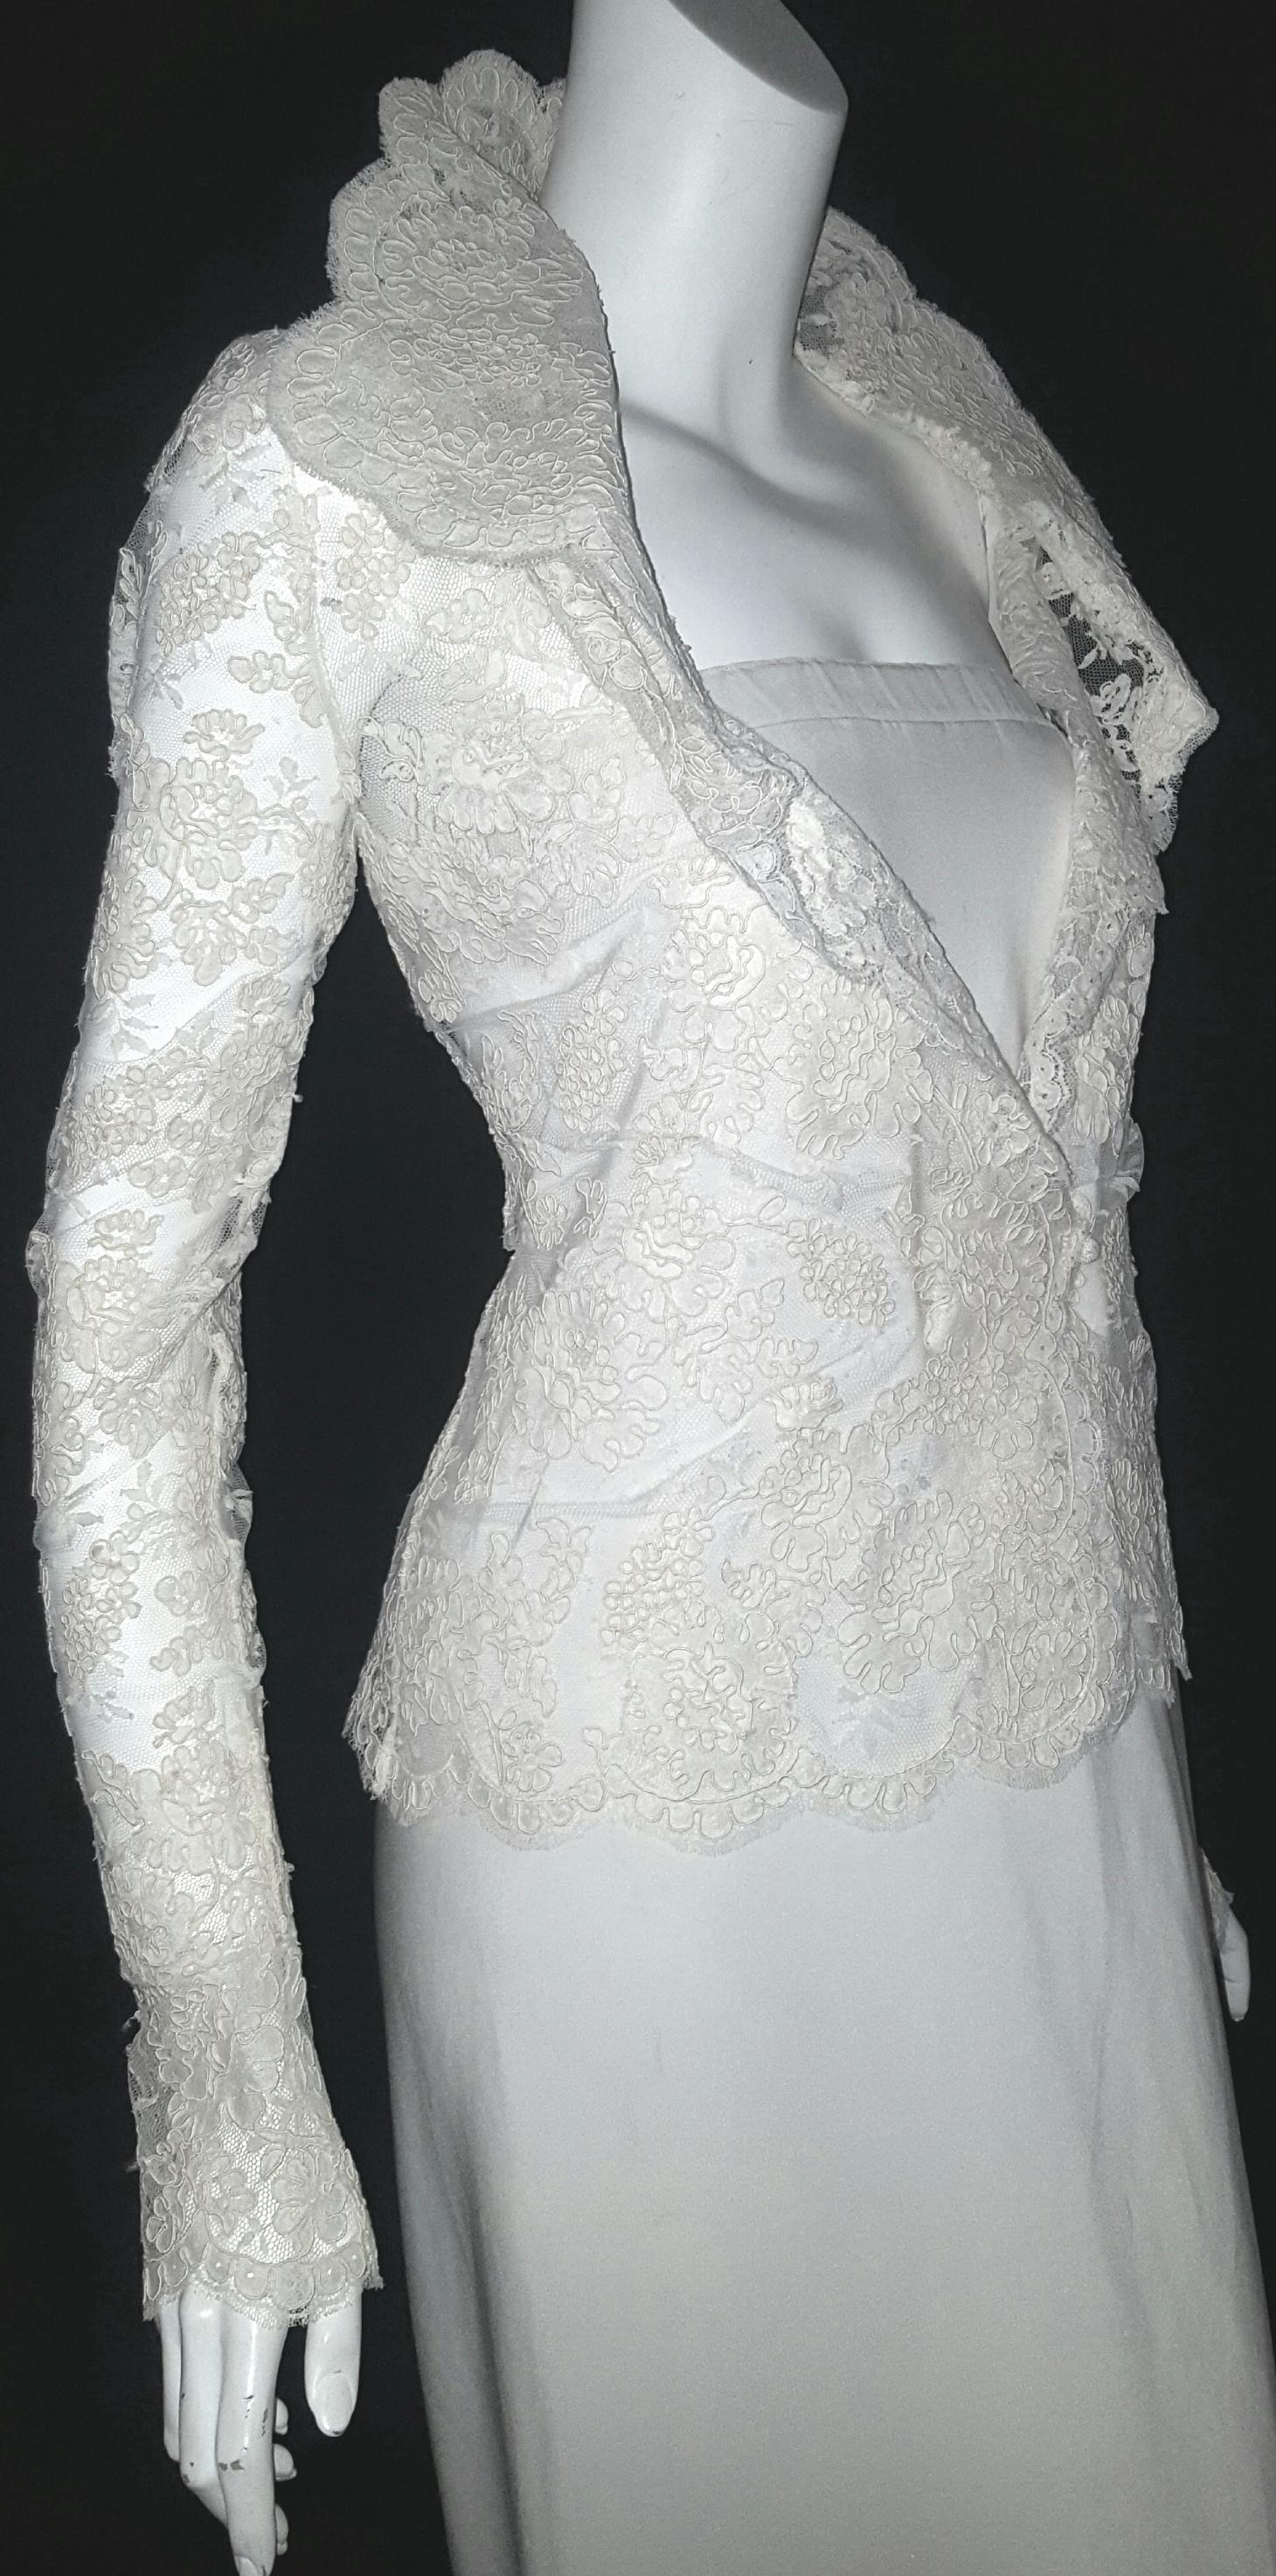 Valentino Ivory romantic top of cotton cord  floral lace with scalloped shirt collar, cuffs and hem.   This delicate Valentino jacket is unlined, so just add a silk camisole in same tone or contrasting color to highlight the cord lace design.  The